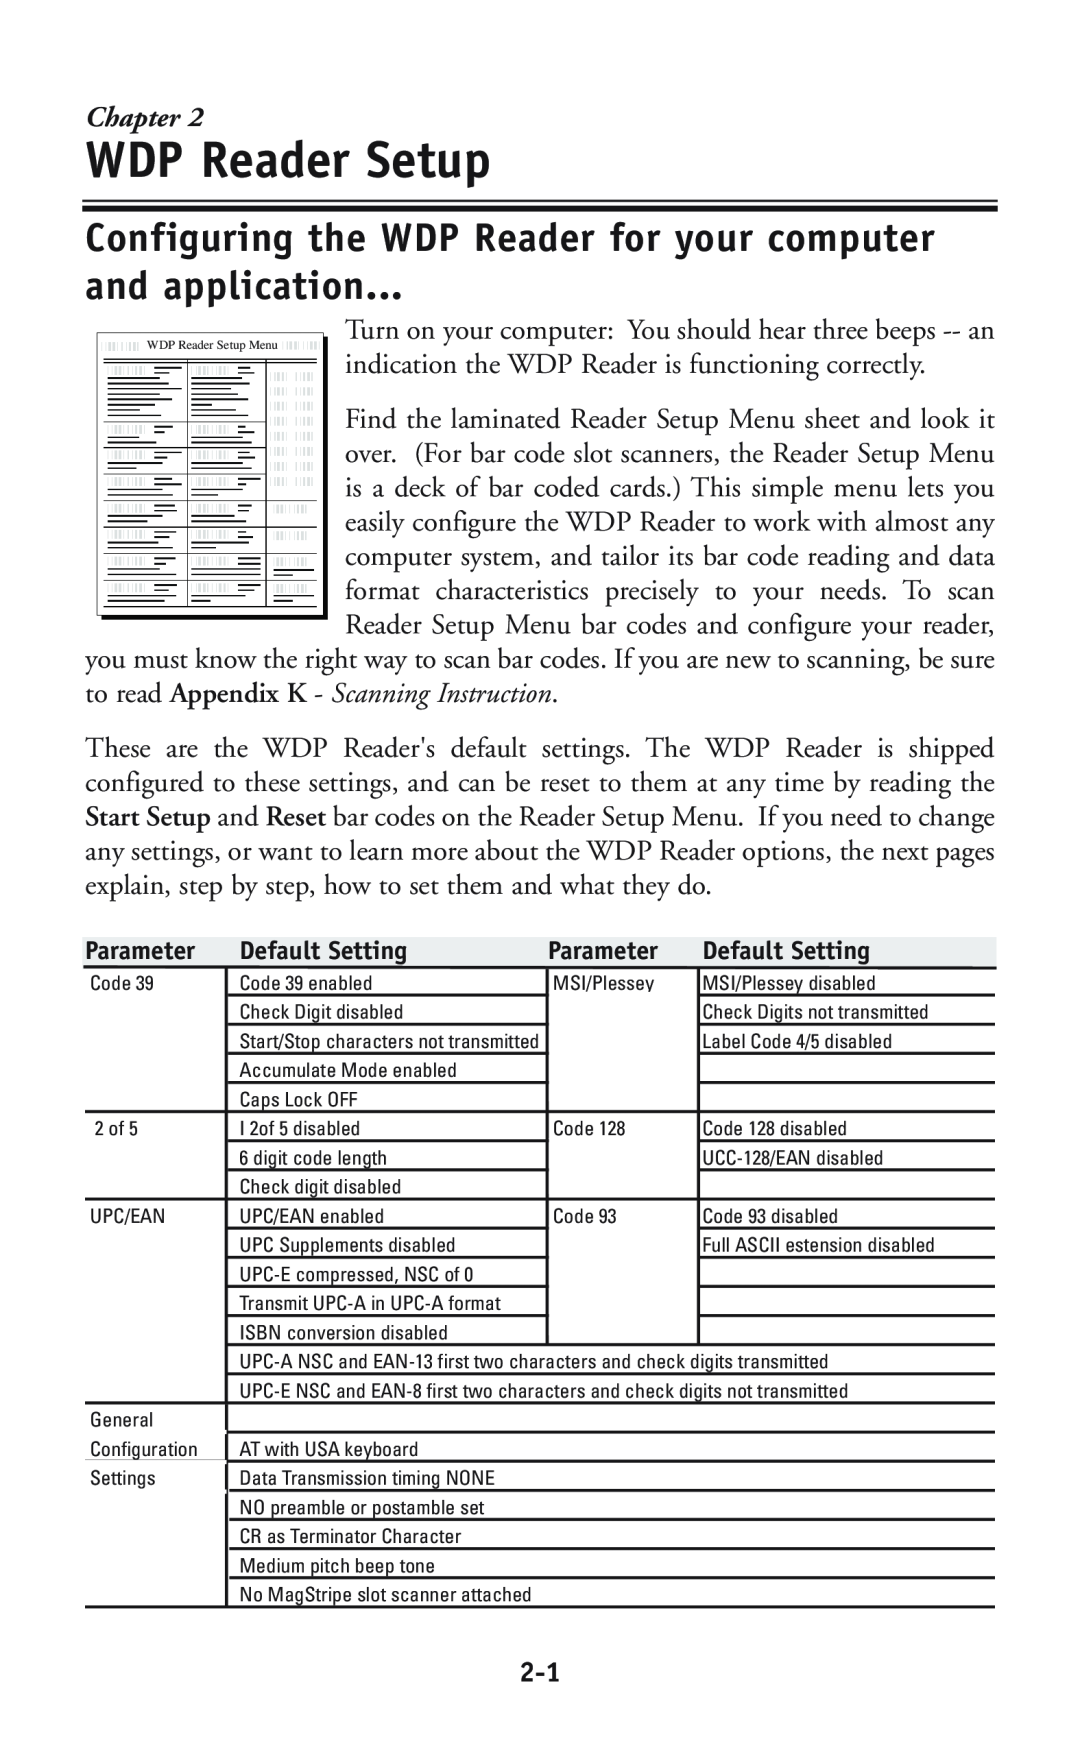 Worth Data P11/12 user manual WDP Reader Setup, Configuring the WDP Reader for your computer and application, Chapter 